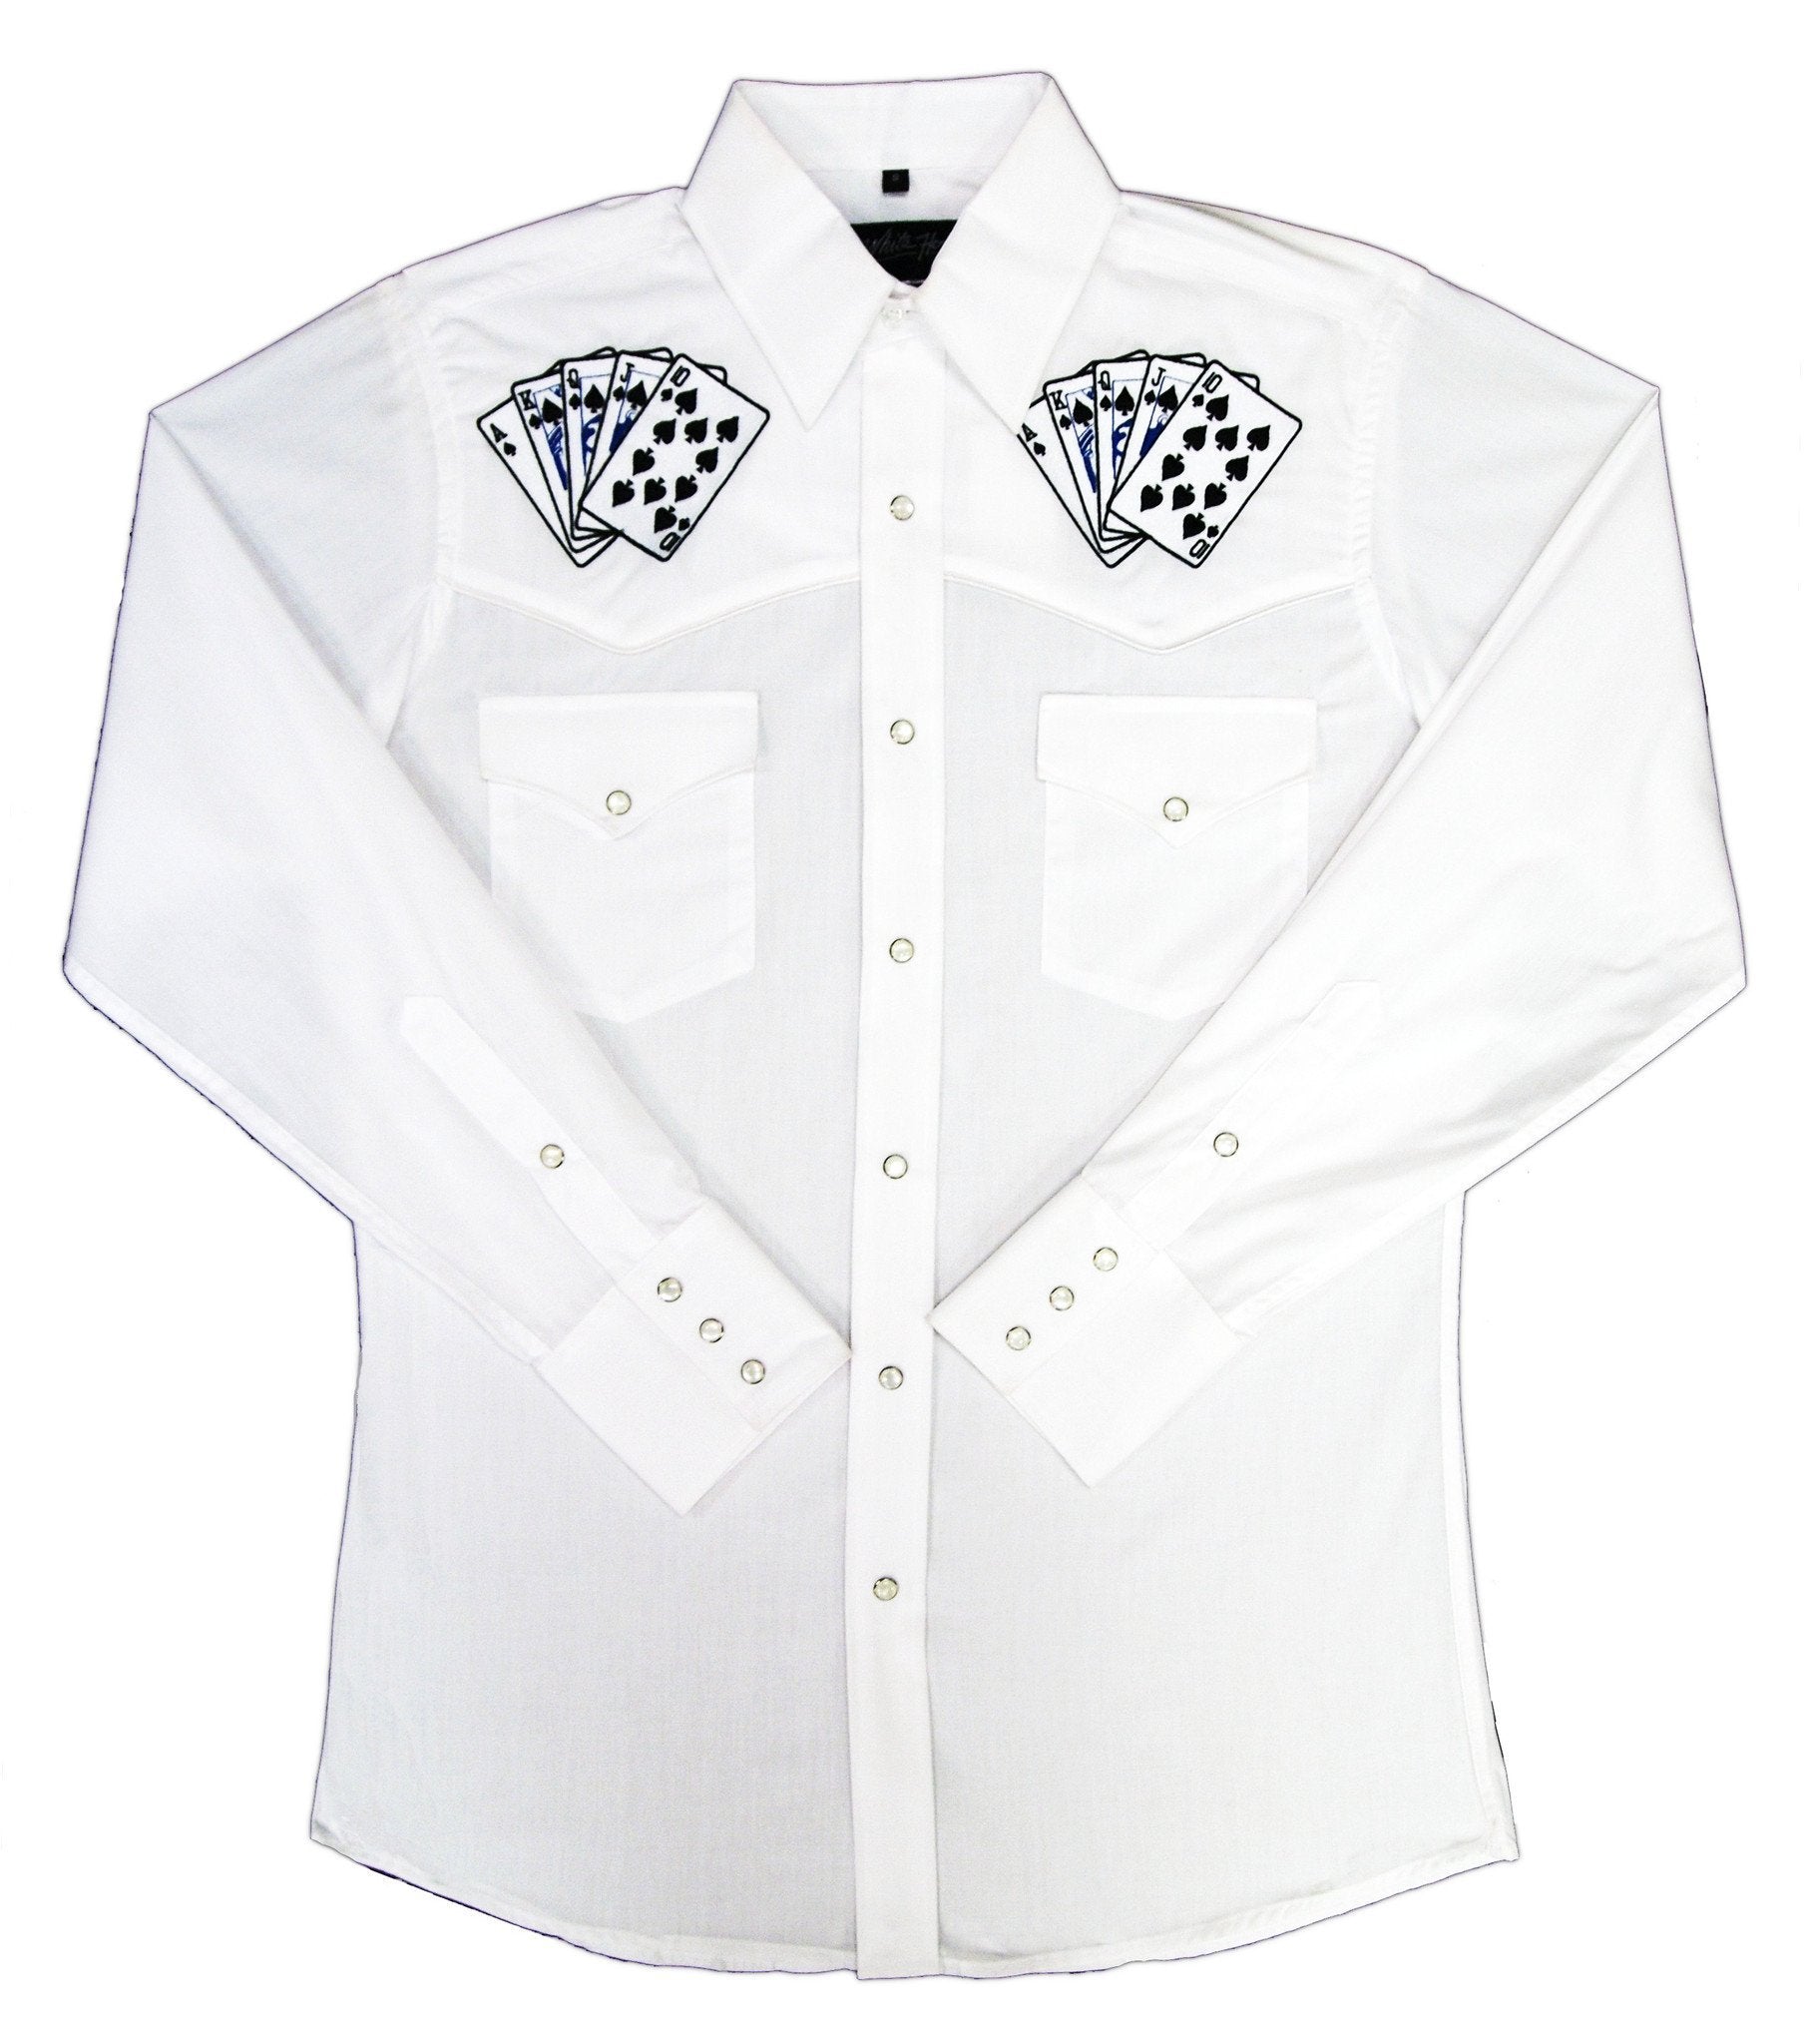 Western Shirt - Classic Solid Men - White Horse Color White Size 2XL